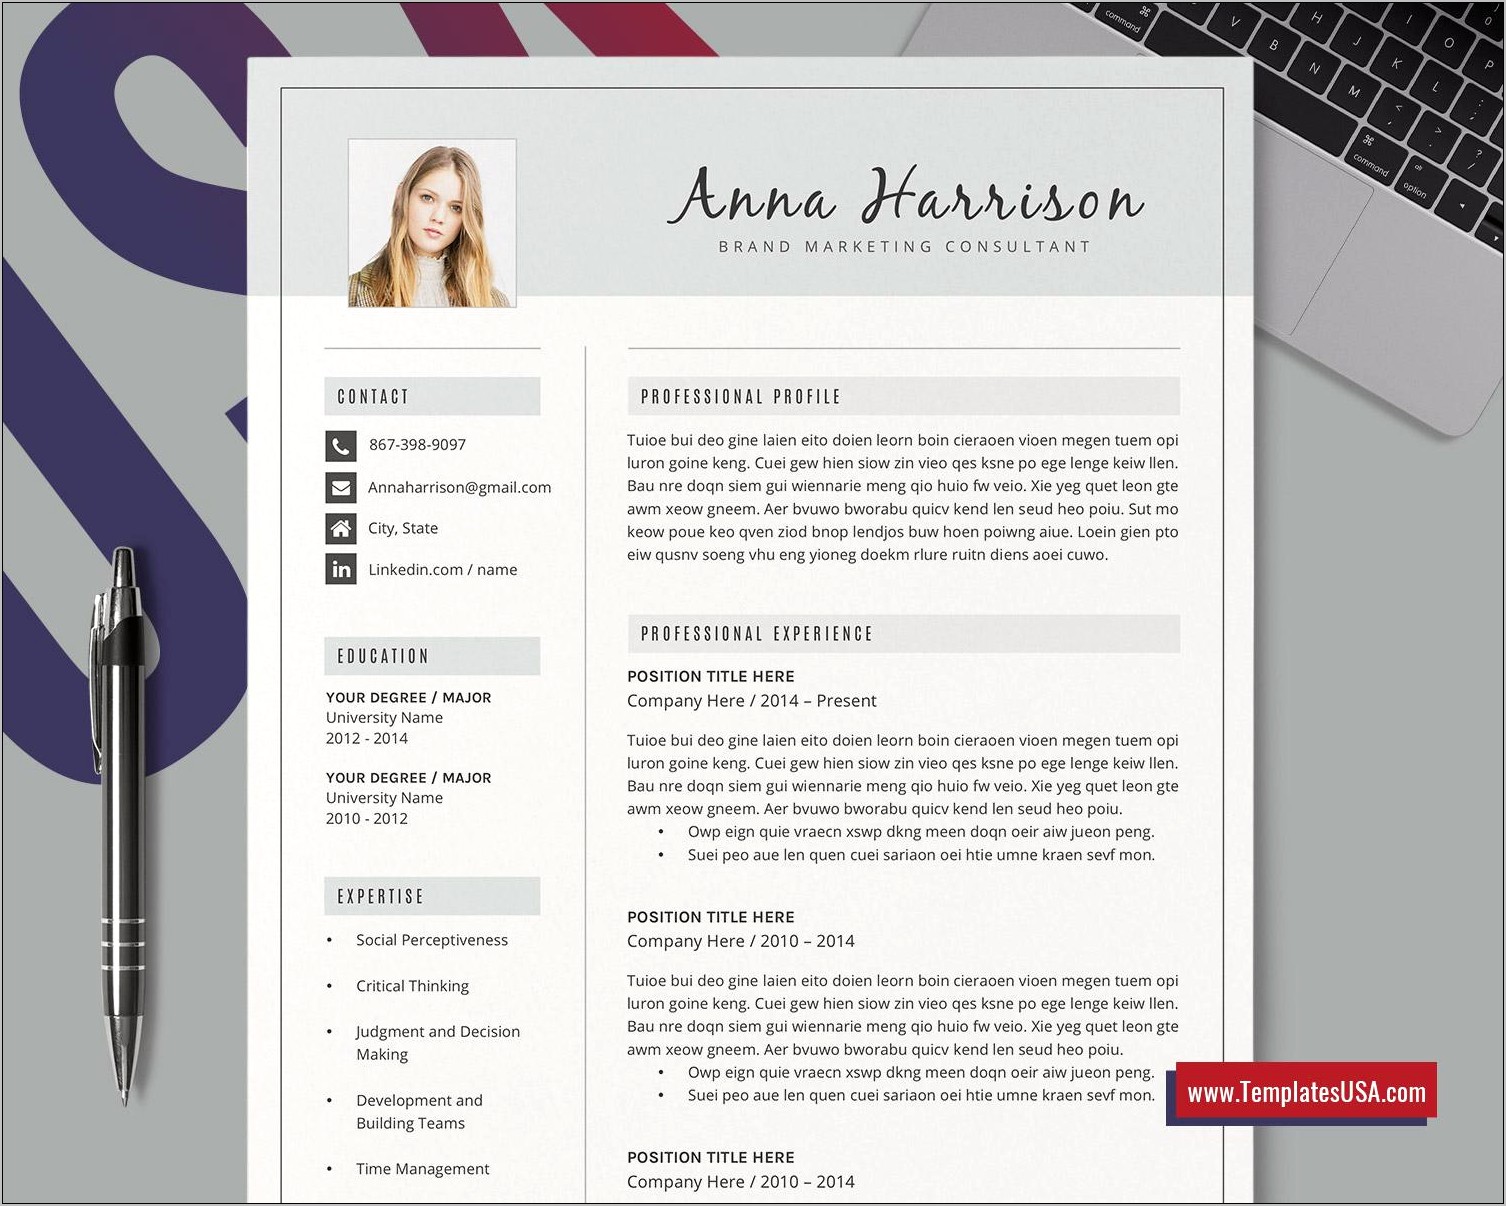 Is Using Word's Resume Templates Good